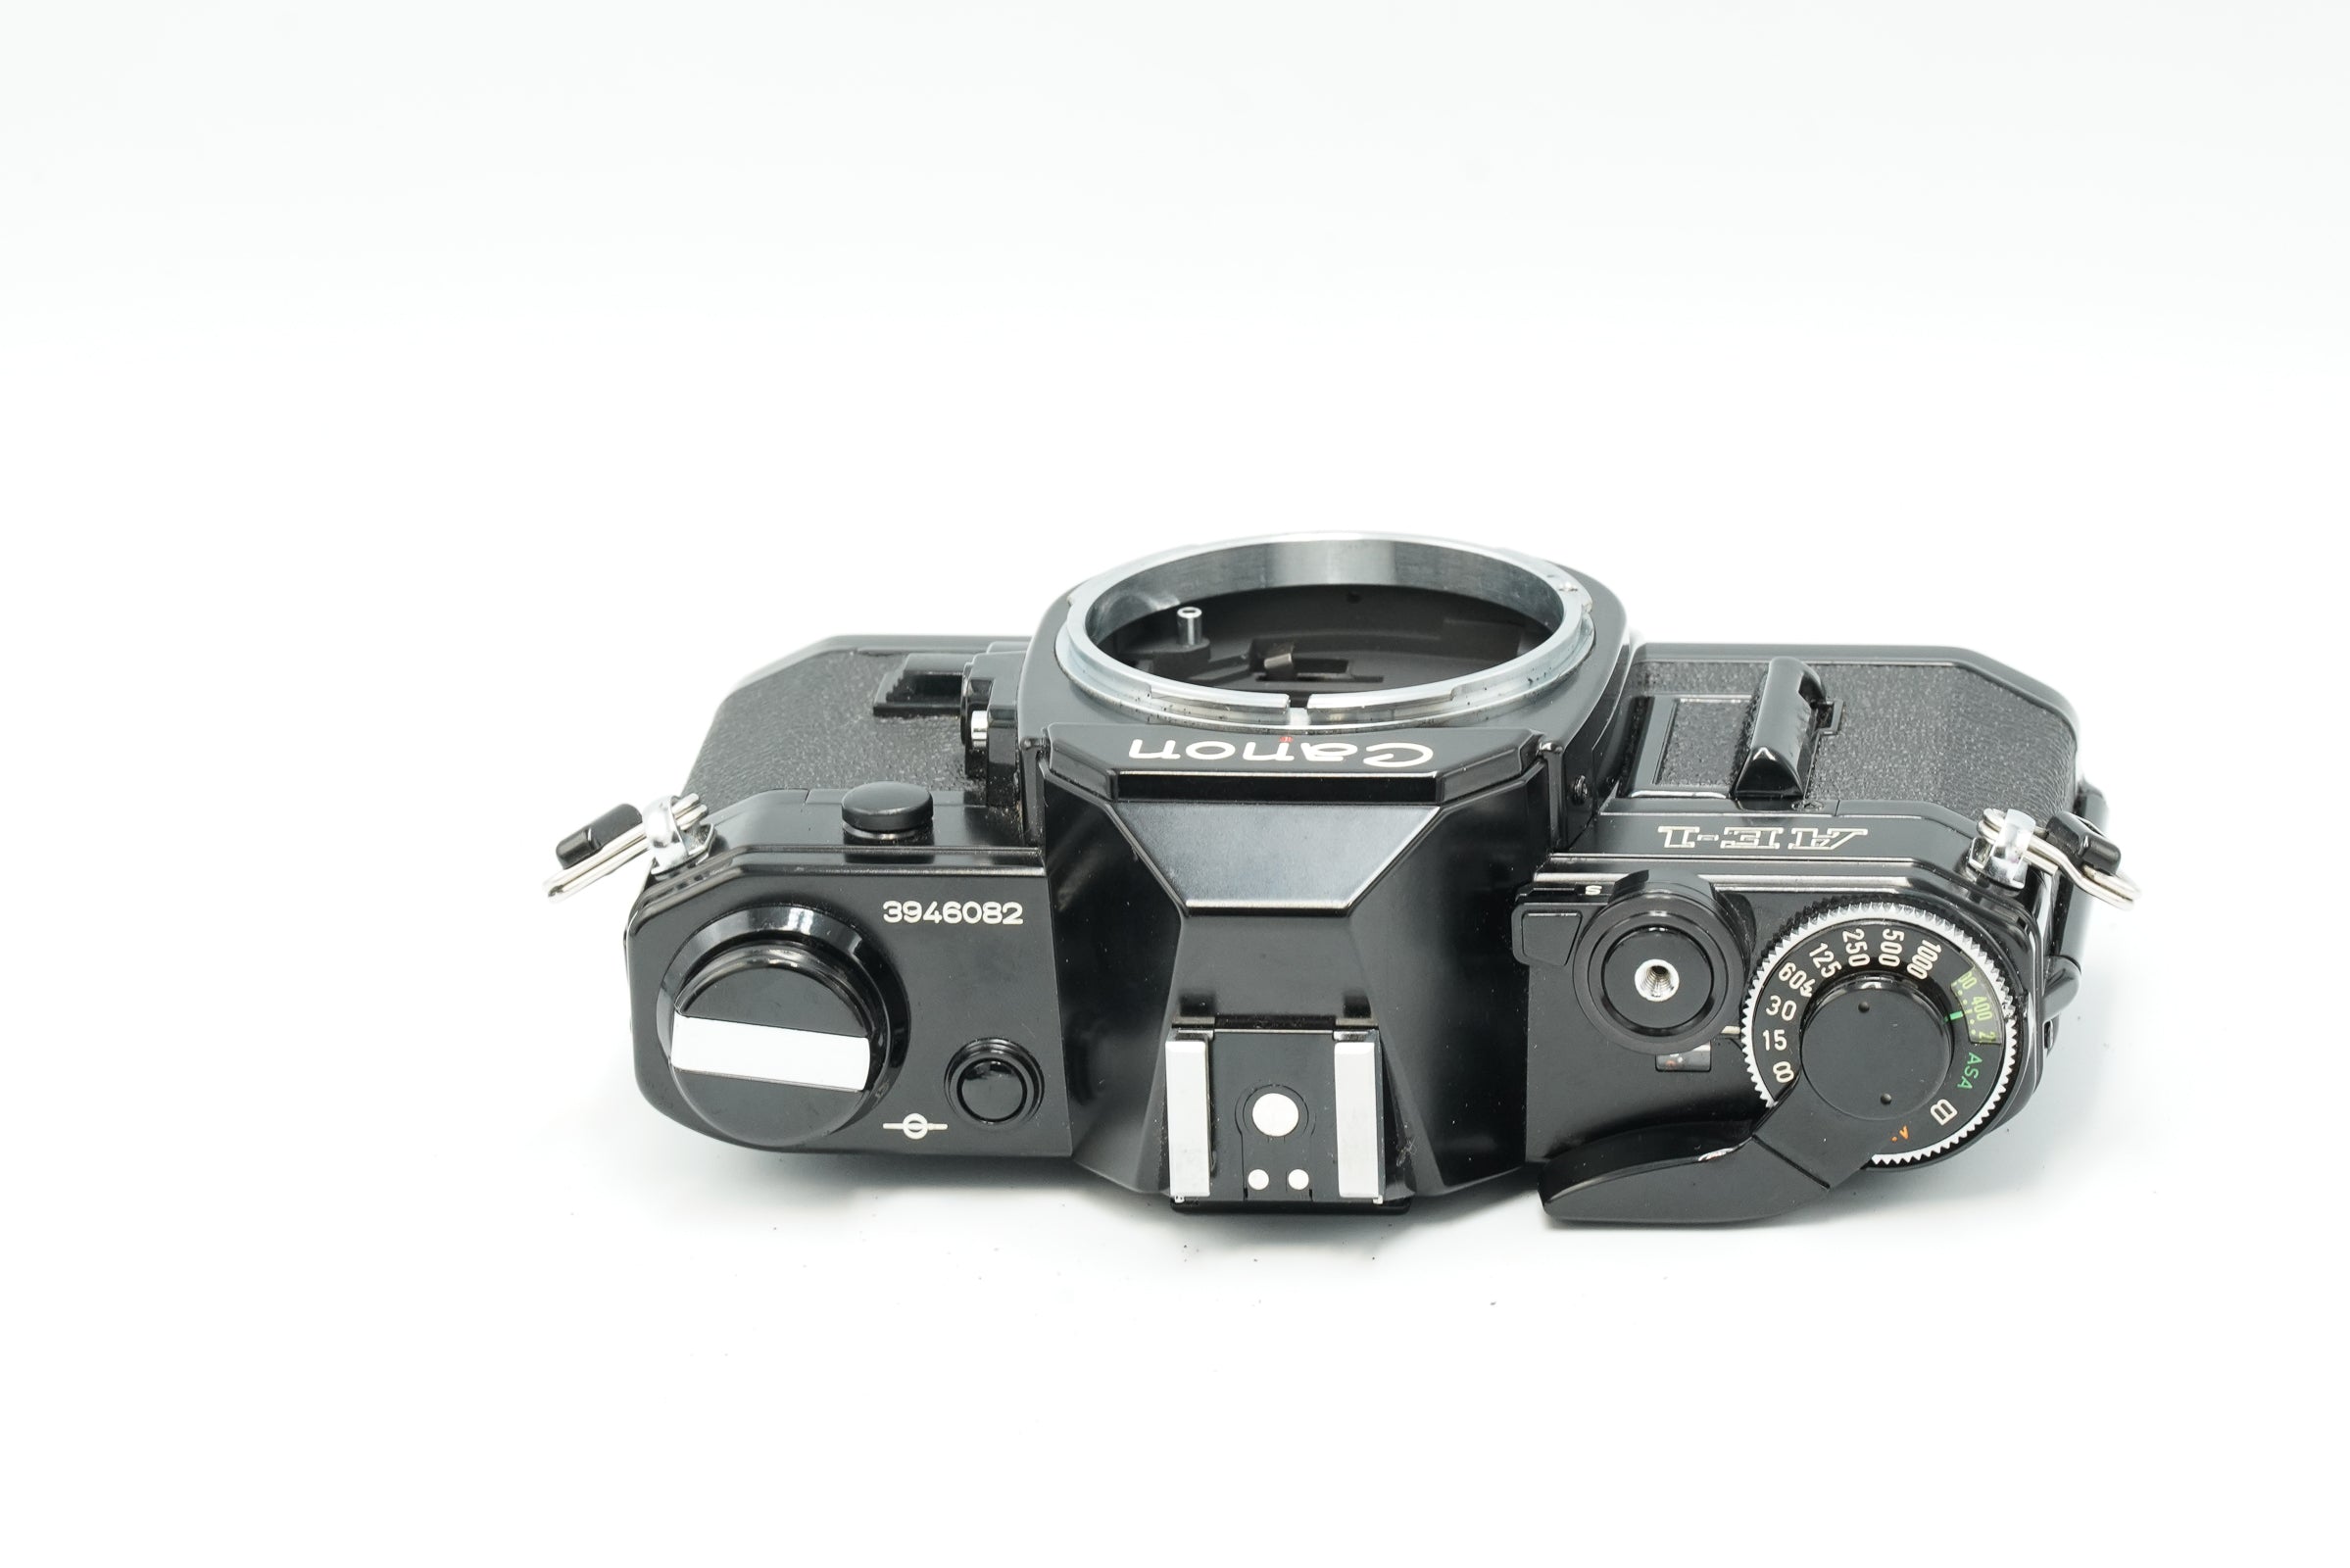 Canon AE1 black, with various lens options